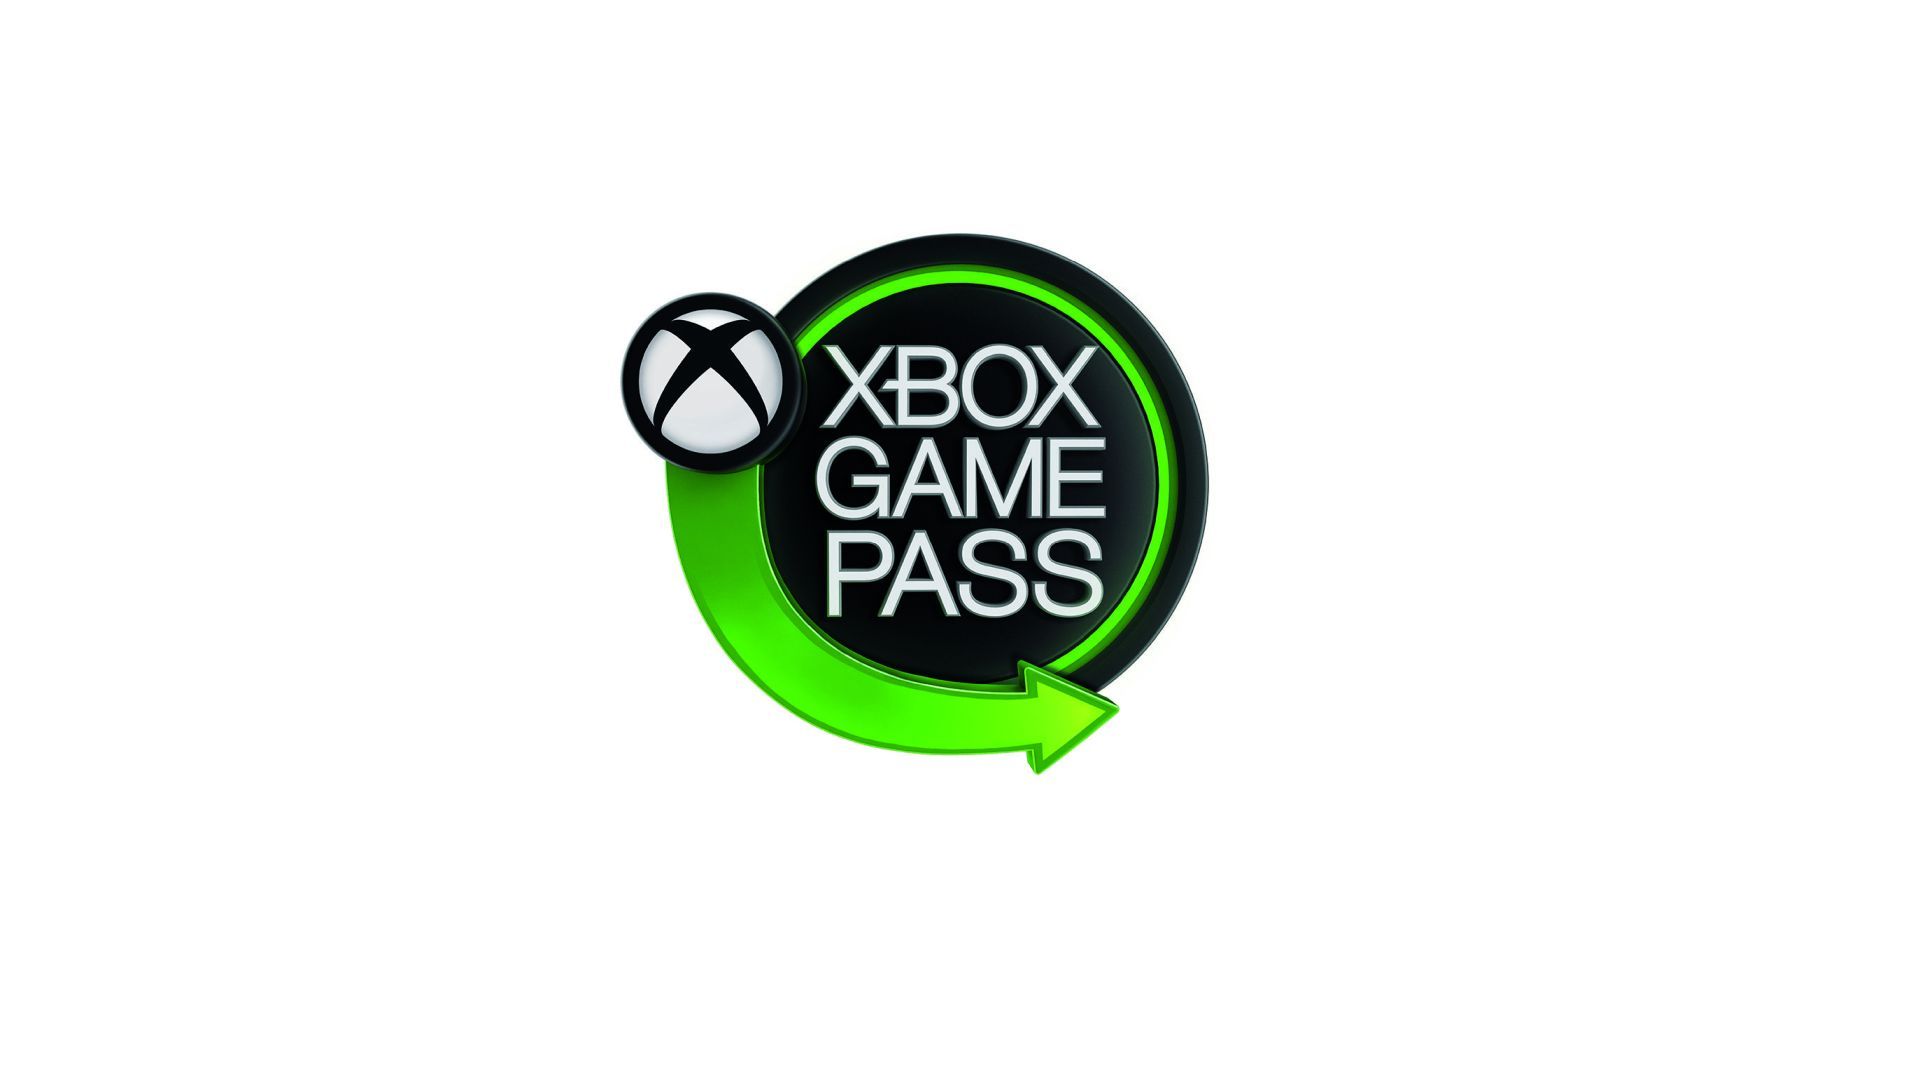 what-is-xbox-game-pass-core-and-does-it-replace-xbox-live-gold-t3